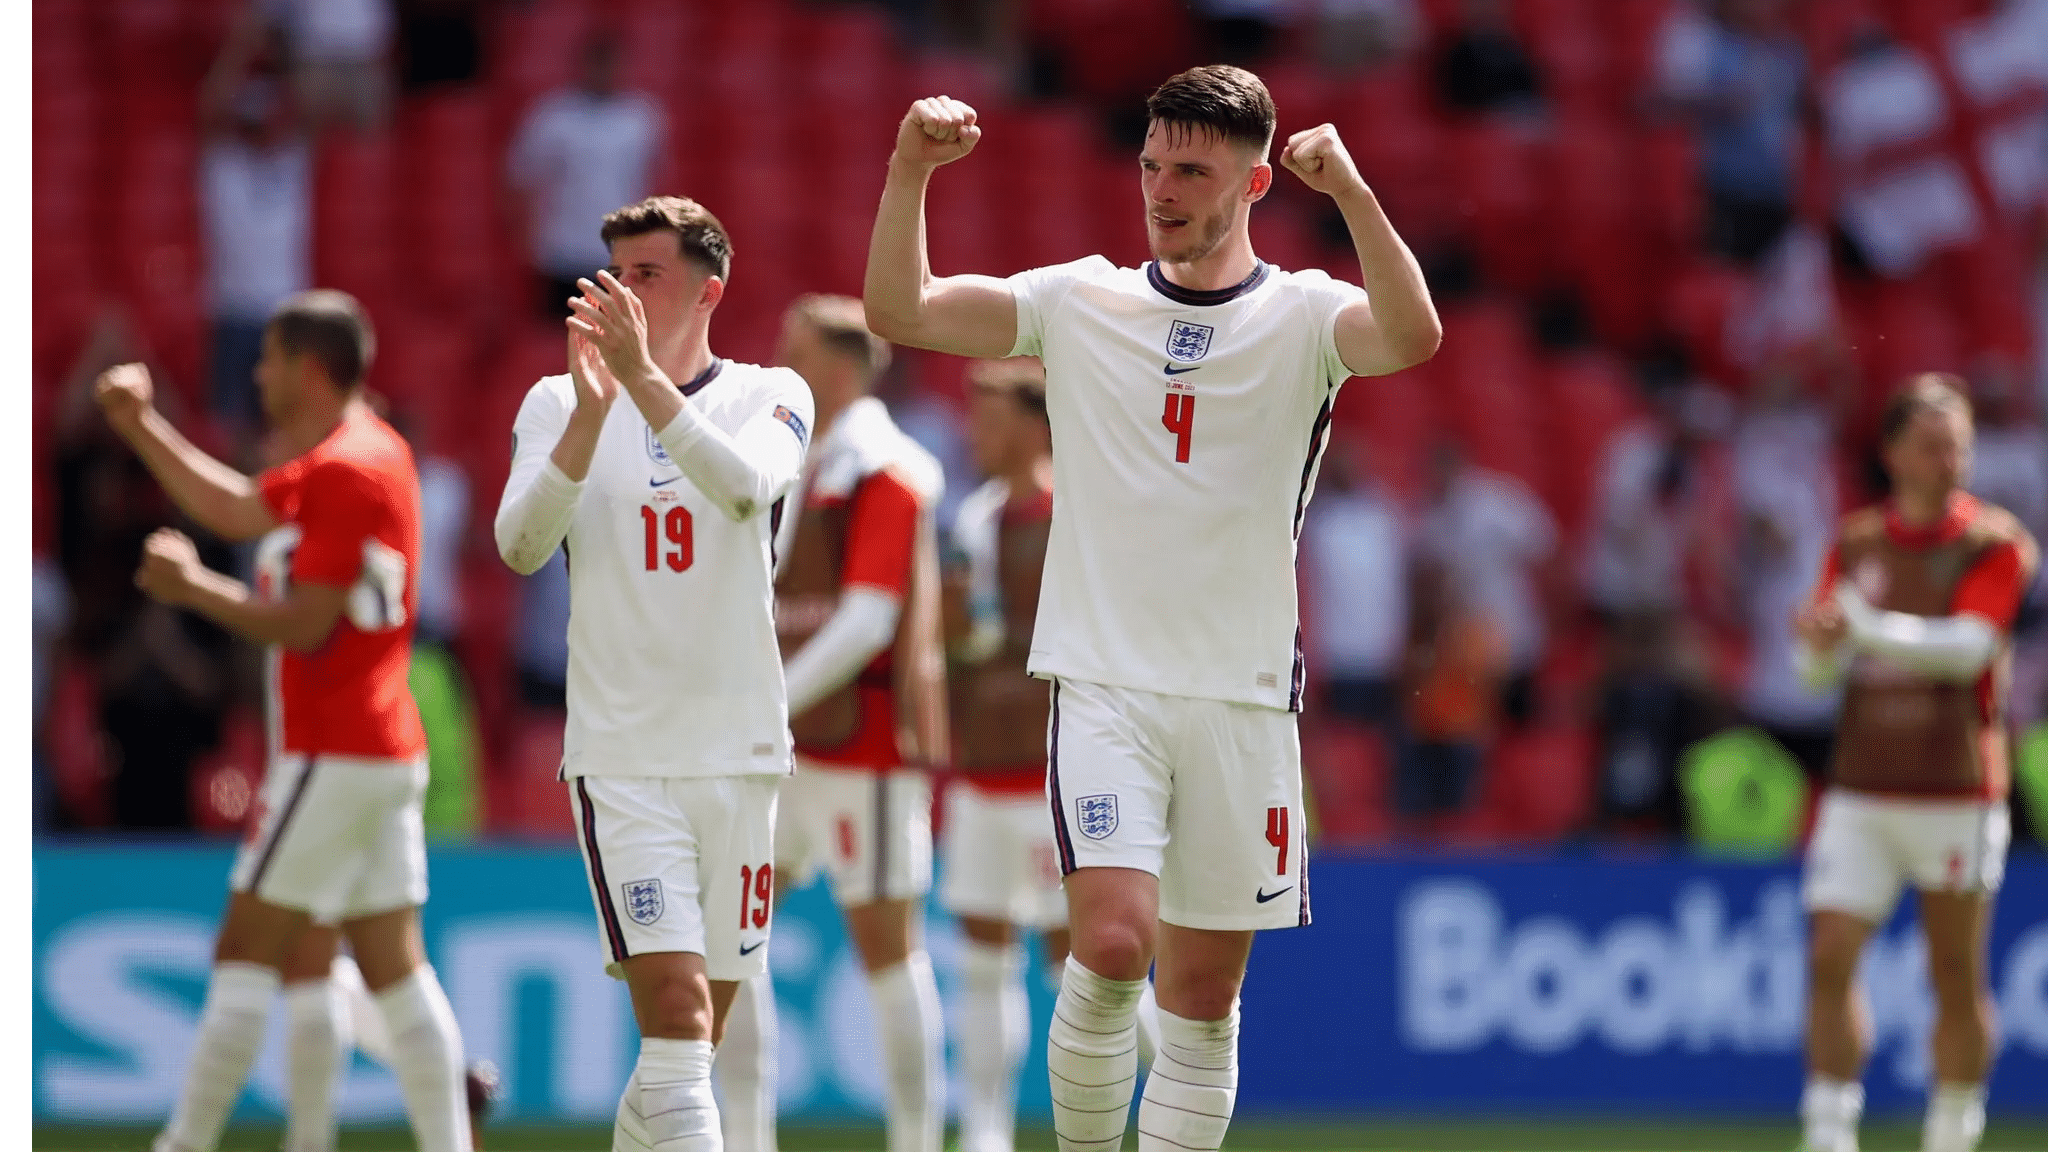 England’s Declan Rice downplays lack of goals at Euro 2020